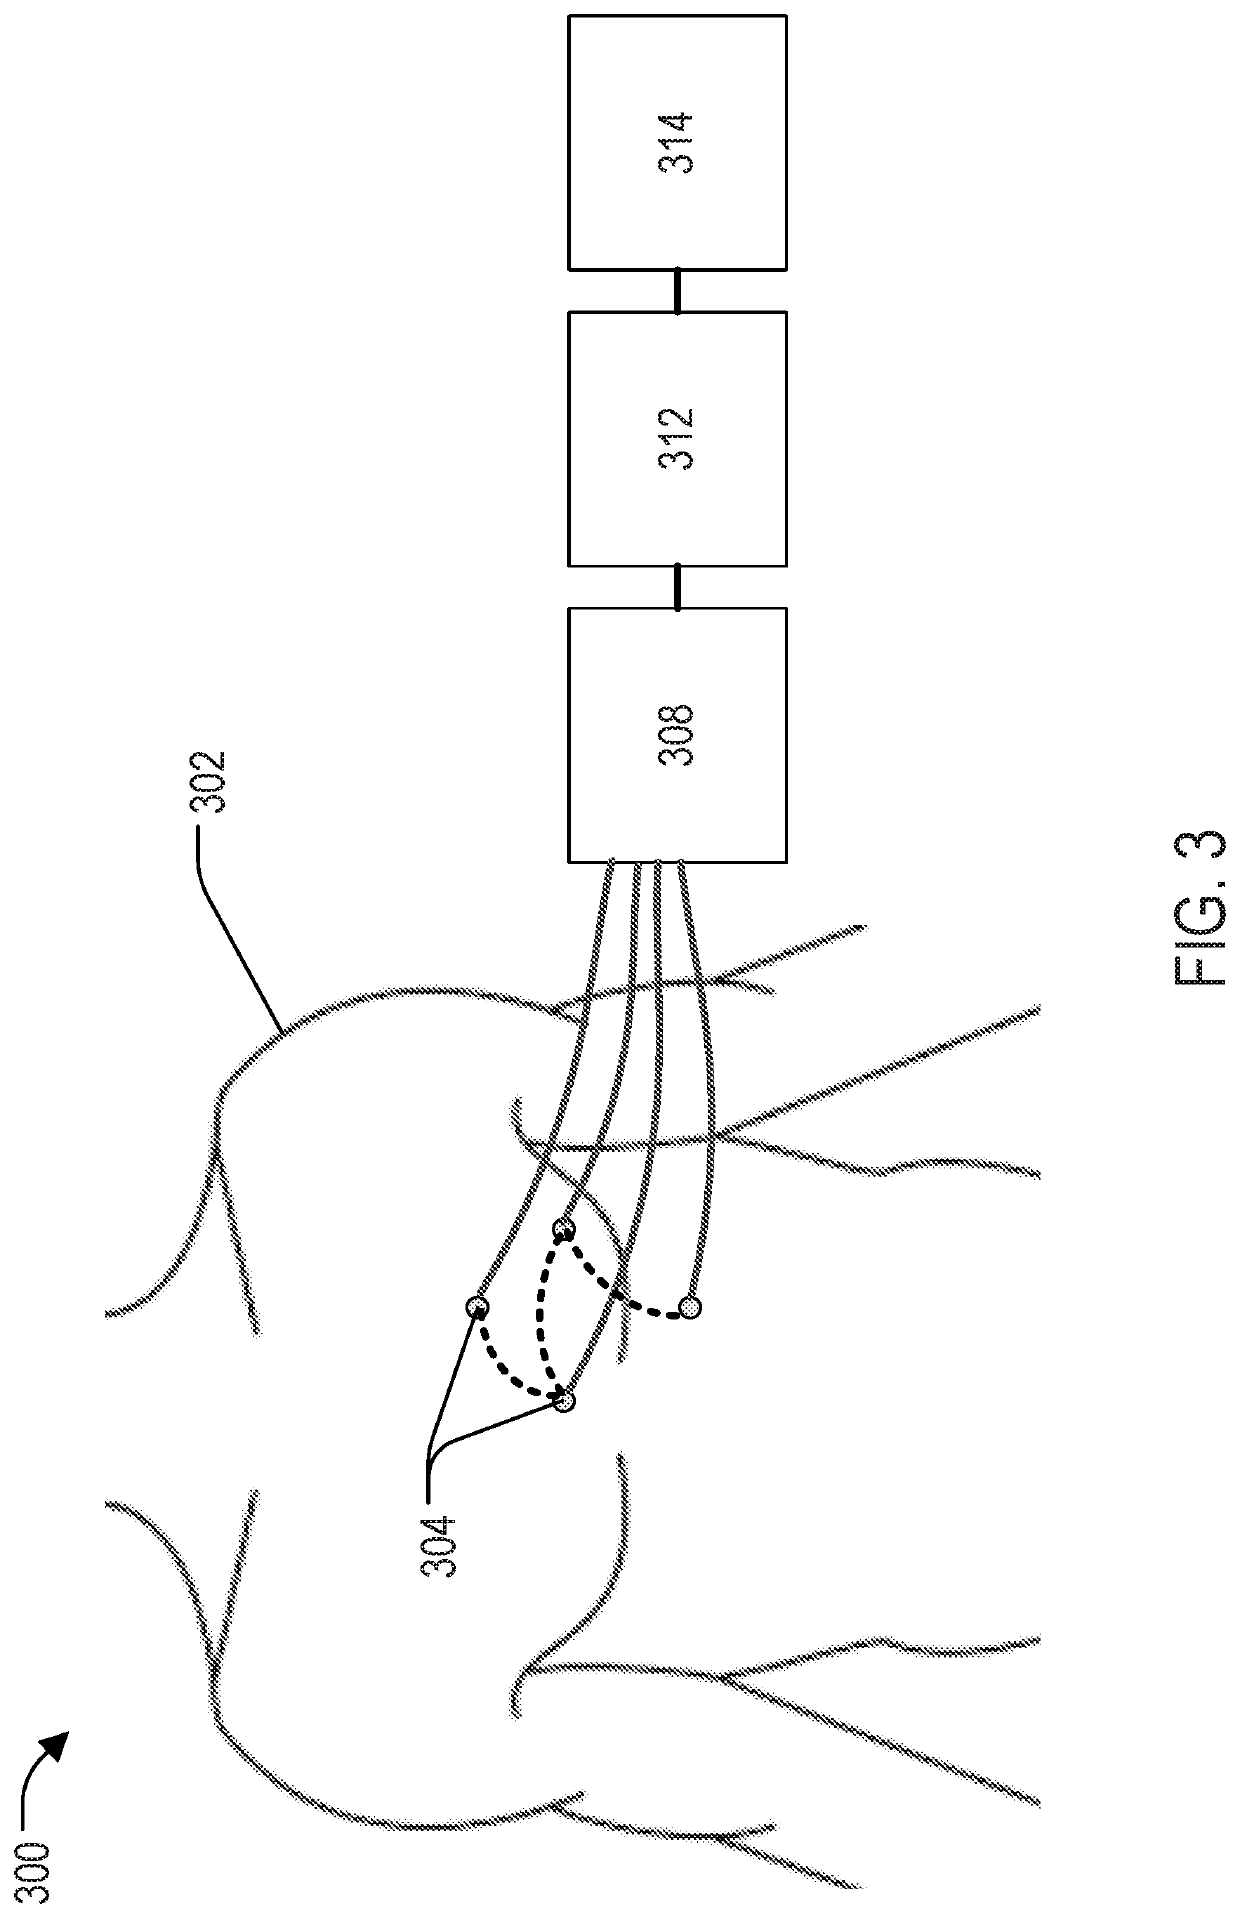 Systems and Methods for Controlling Imaging Artifacts Using an Array of Sensor Data